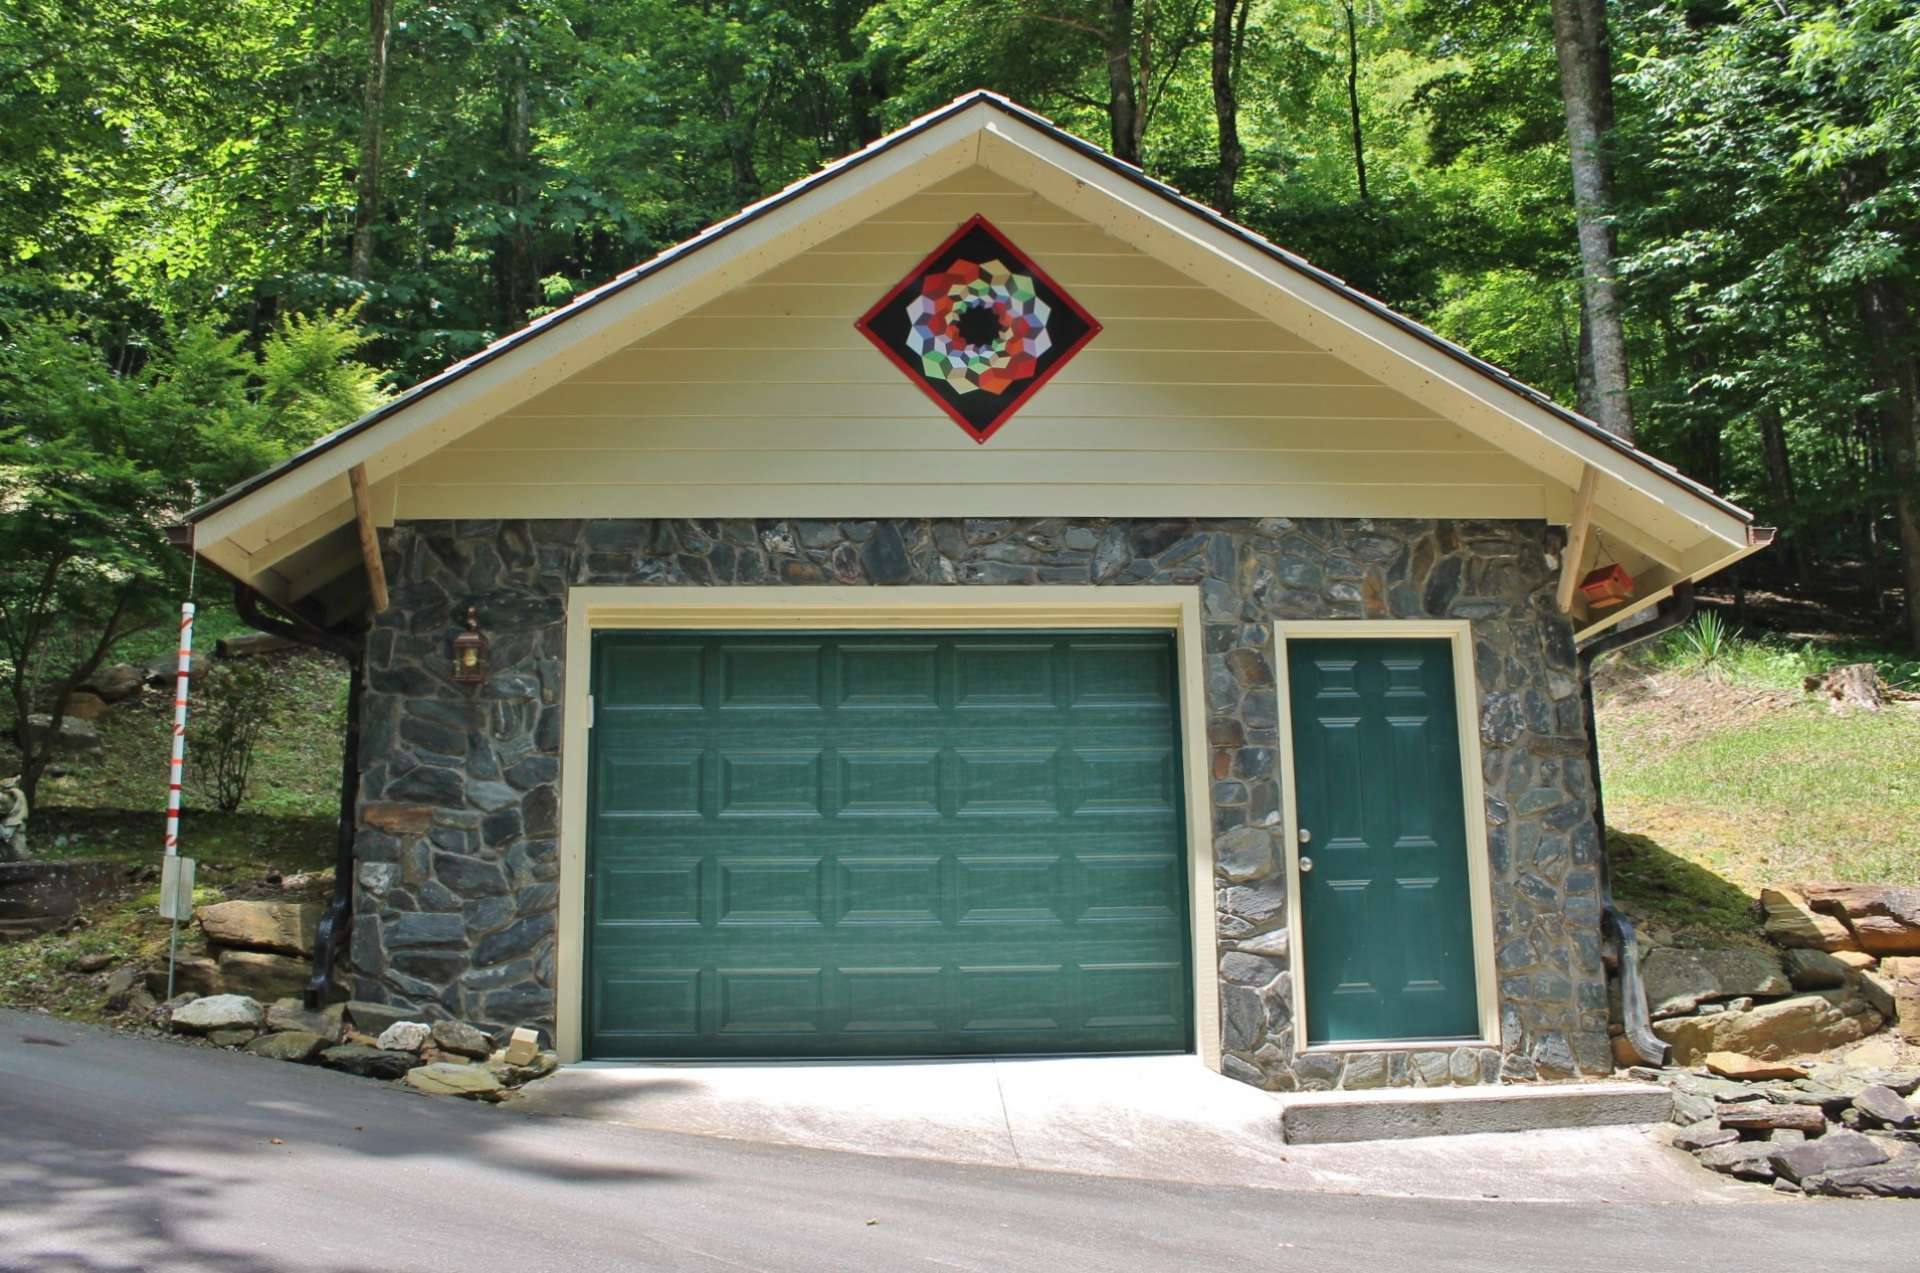 This detached garage is perfect for storing mountain toys such as bikes, kayaks, and ATVs.